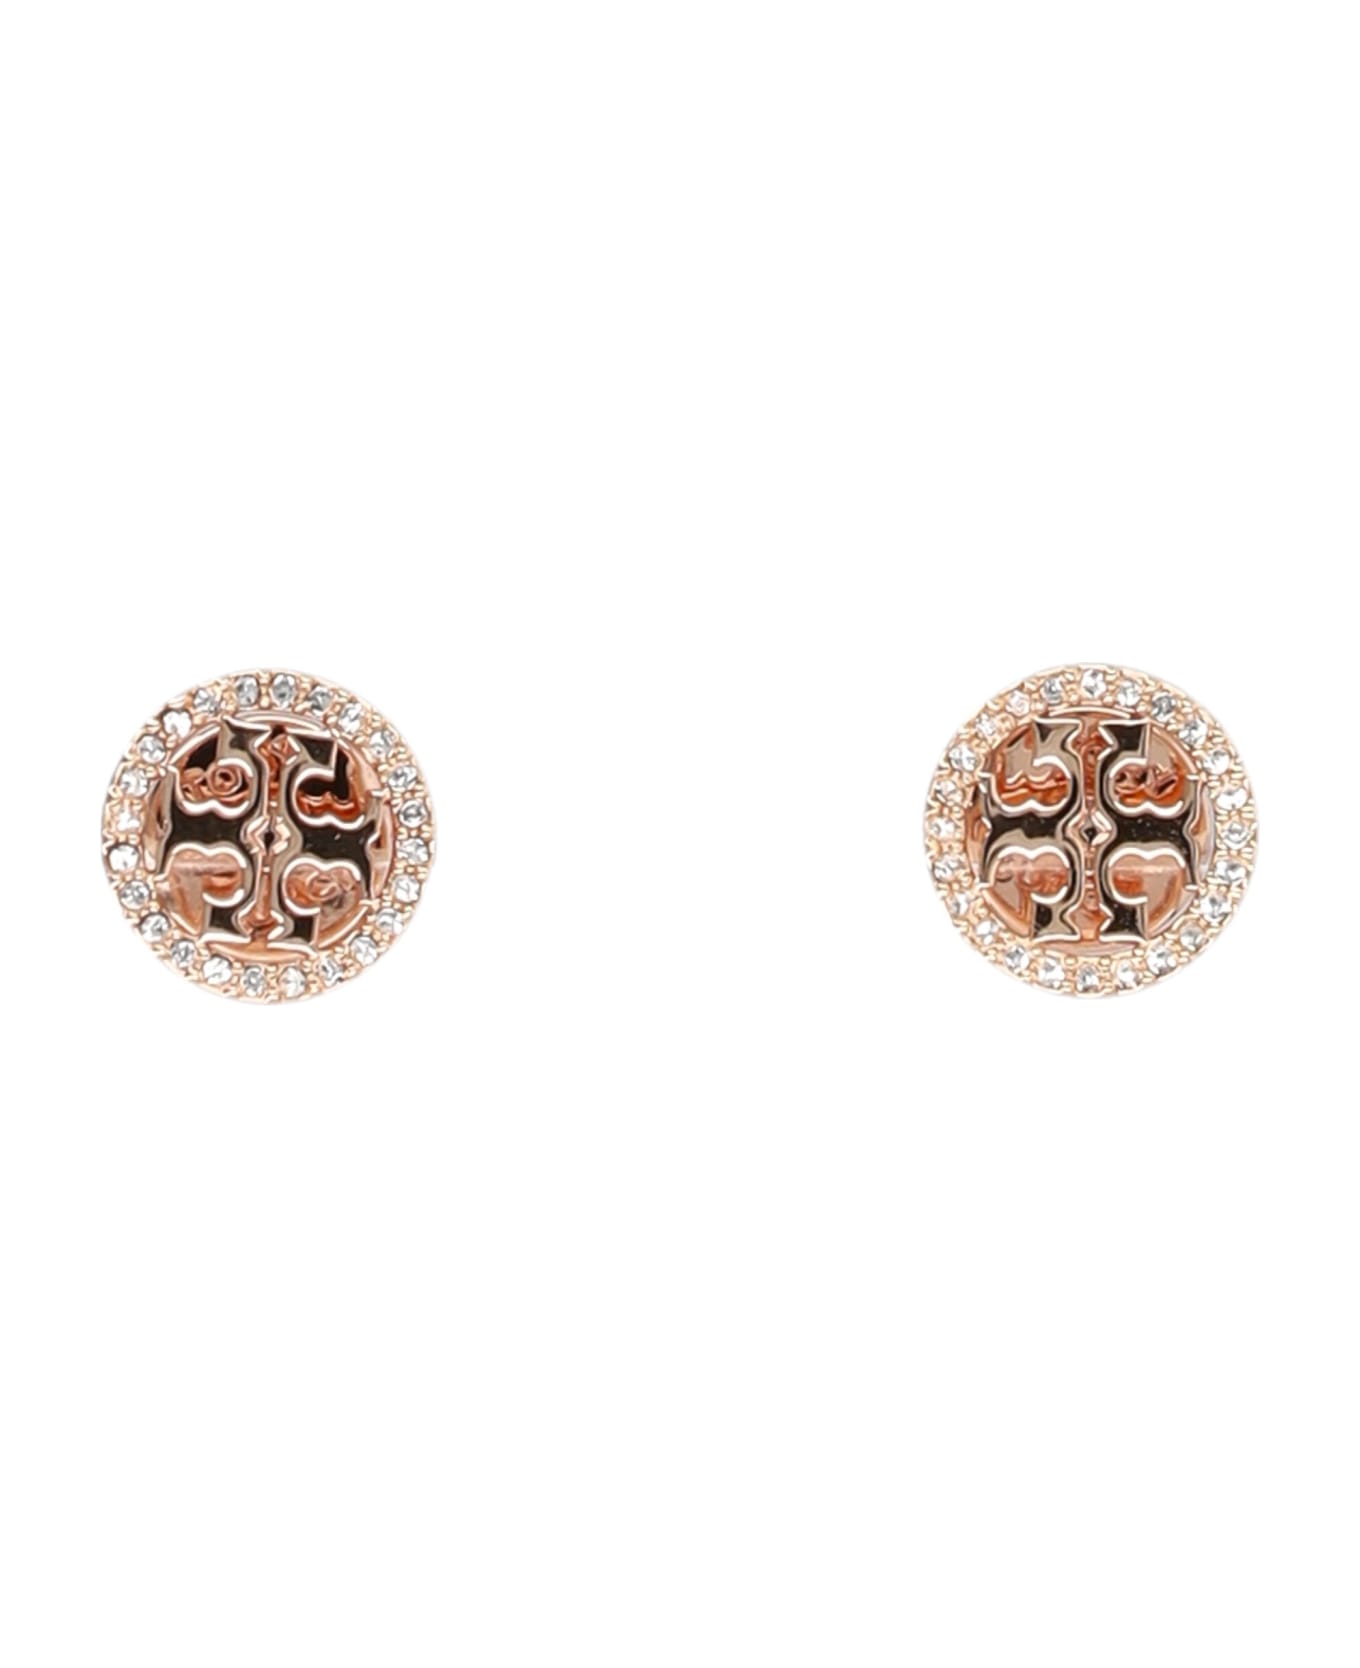 Tory Burch Miller Pave Stud Earring - Rose Gold / Crystal